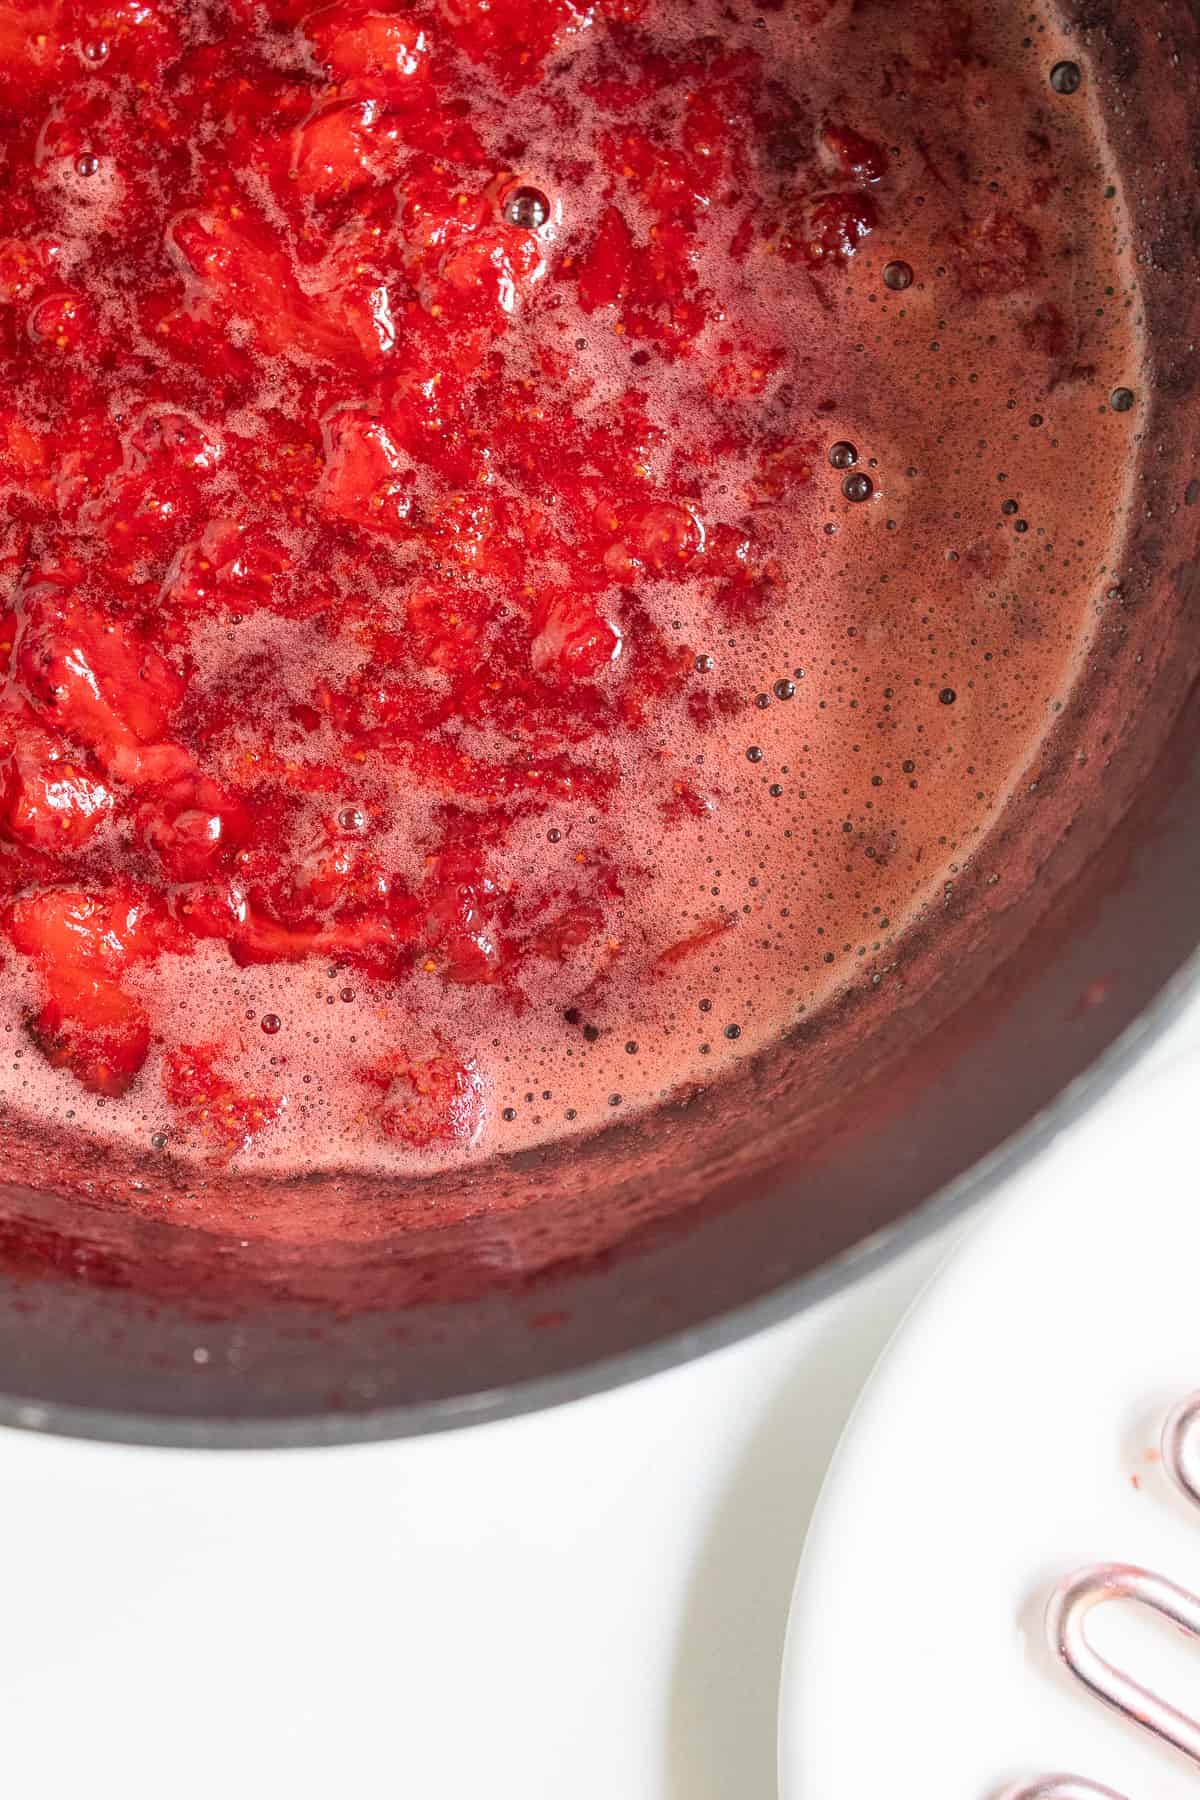 The cooked strawberry mixture is a vibrant red in a black saucepan.